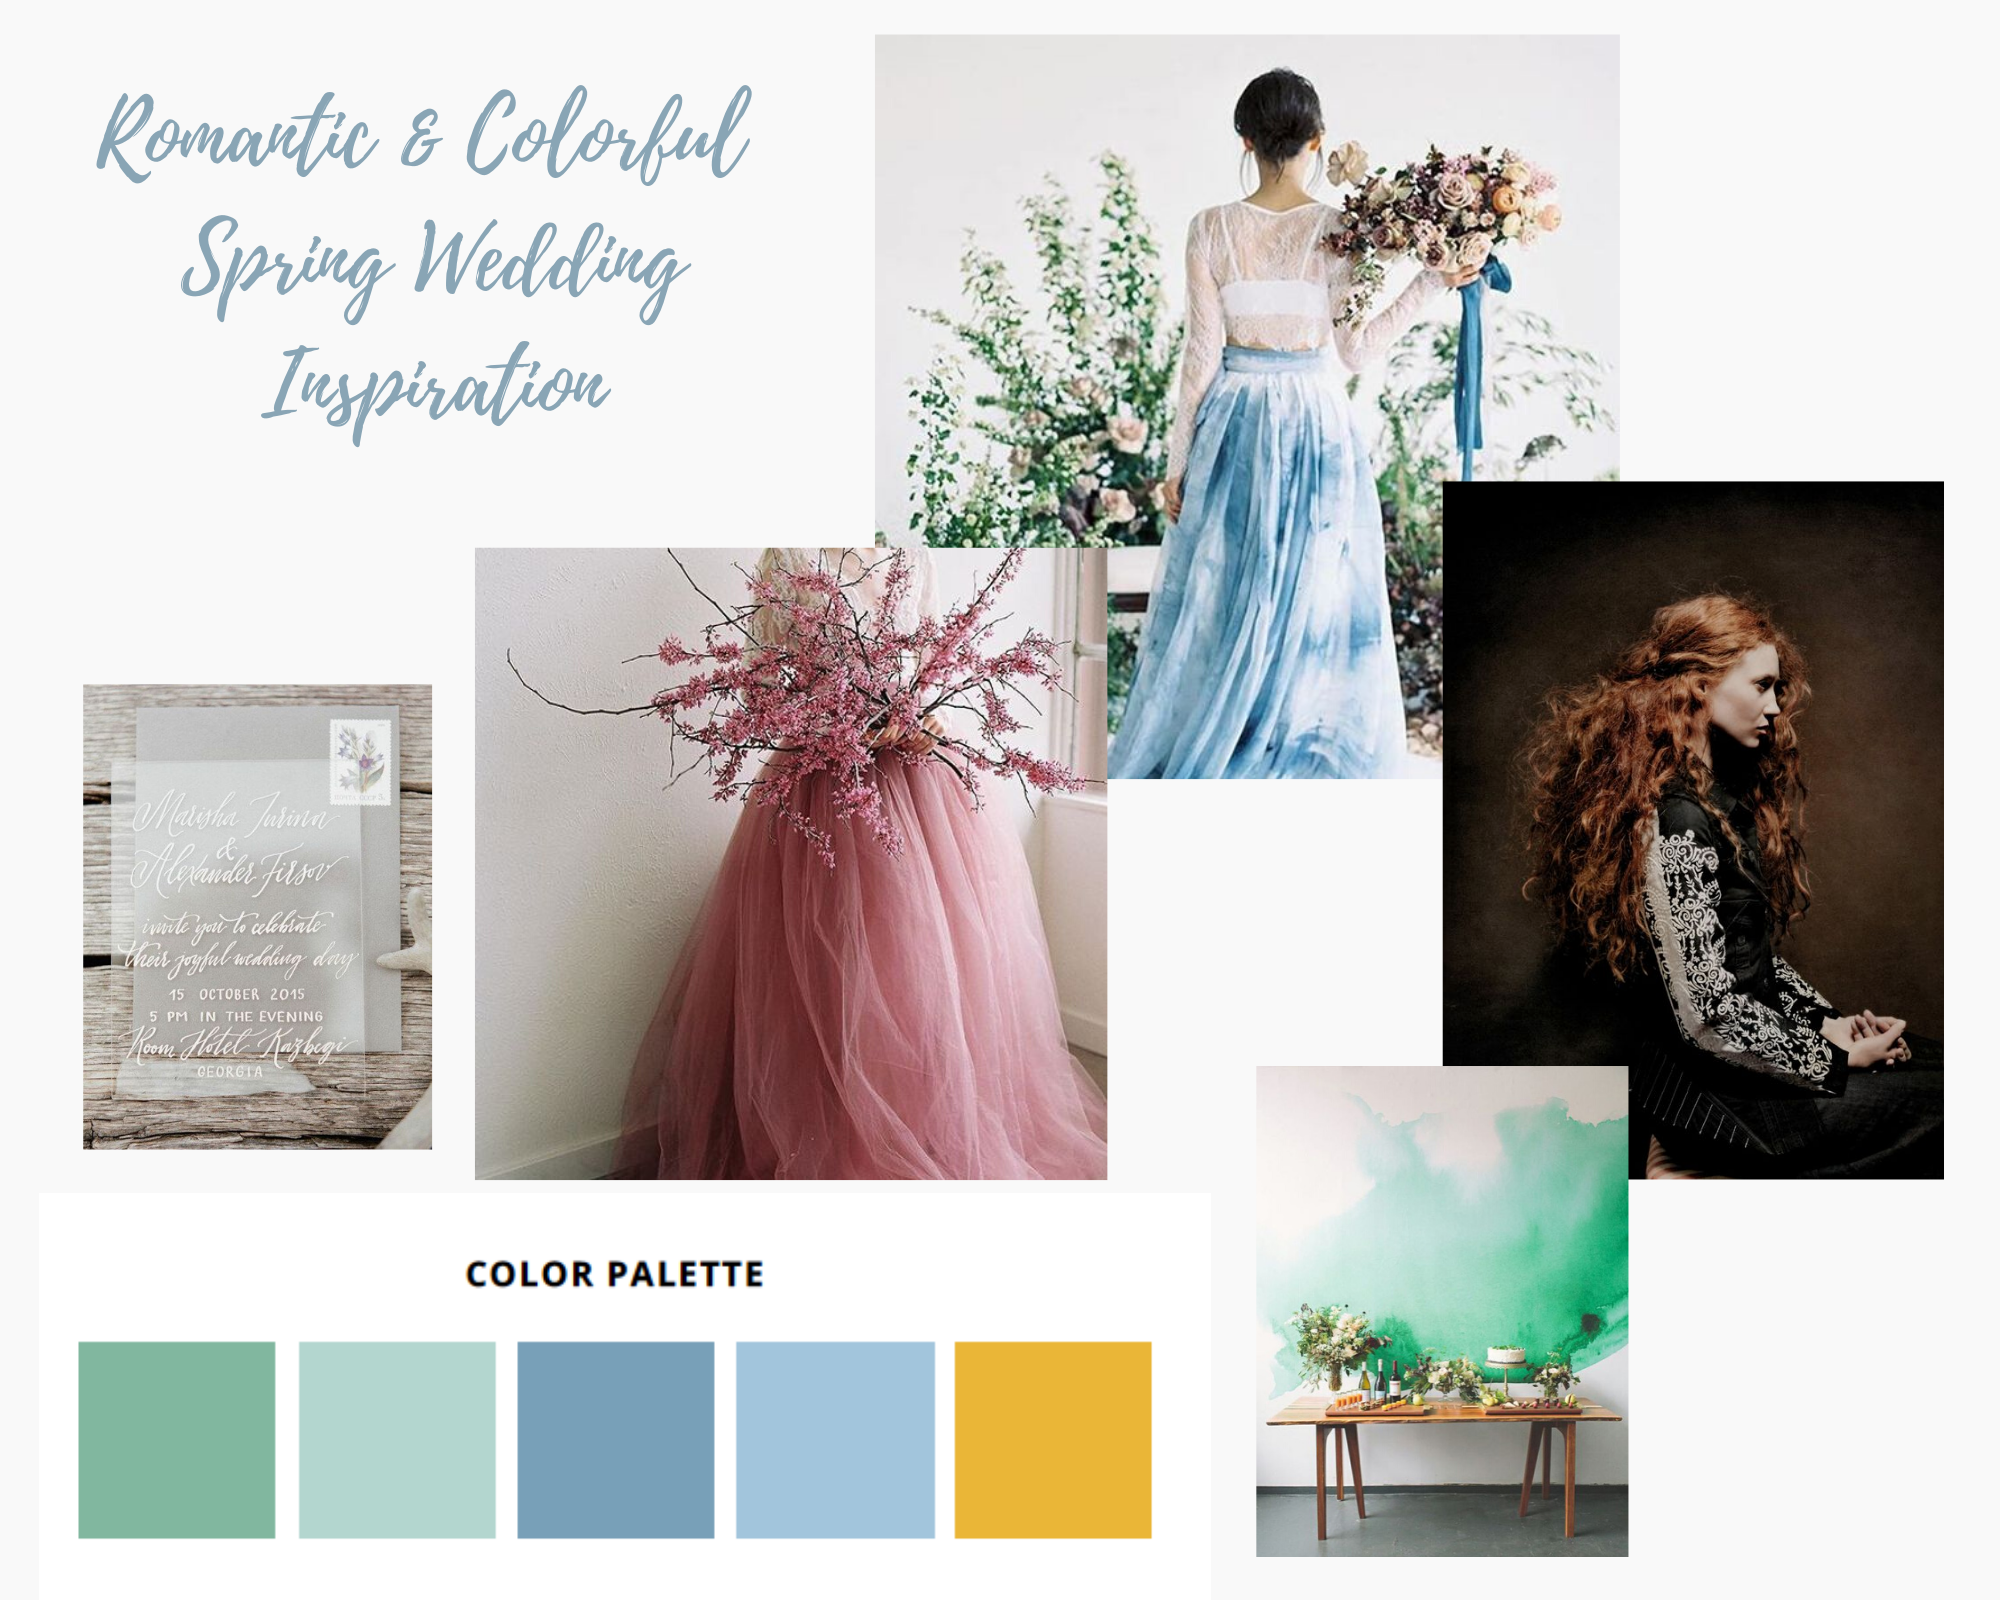 We initially thought we would add pink as a highlight color with the blues and greens, but Christi at Studio C suggested switching out the pink for yellow, which was PERFECT. But I kept the pink image as we wanted to use some spring-like flowering b…